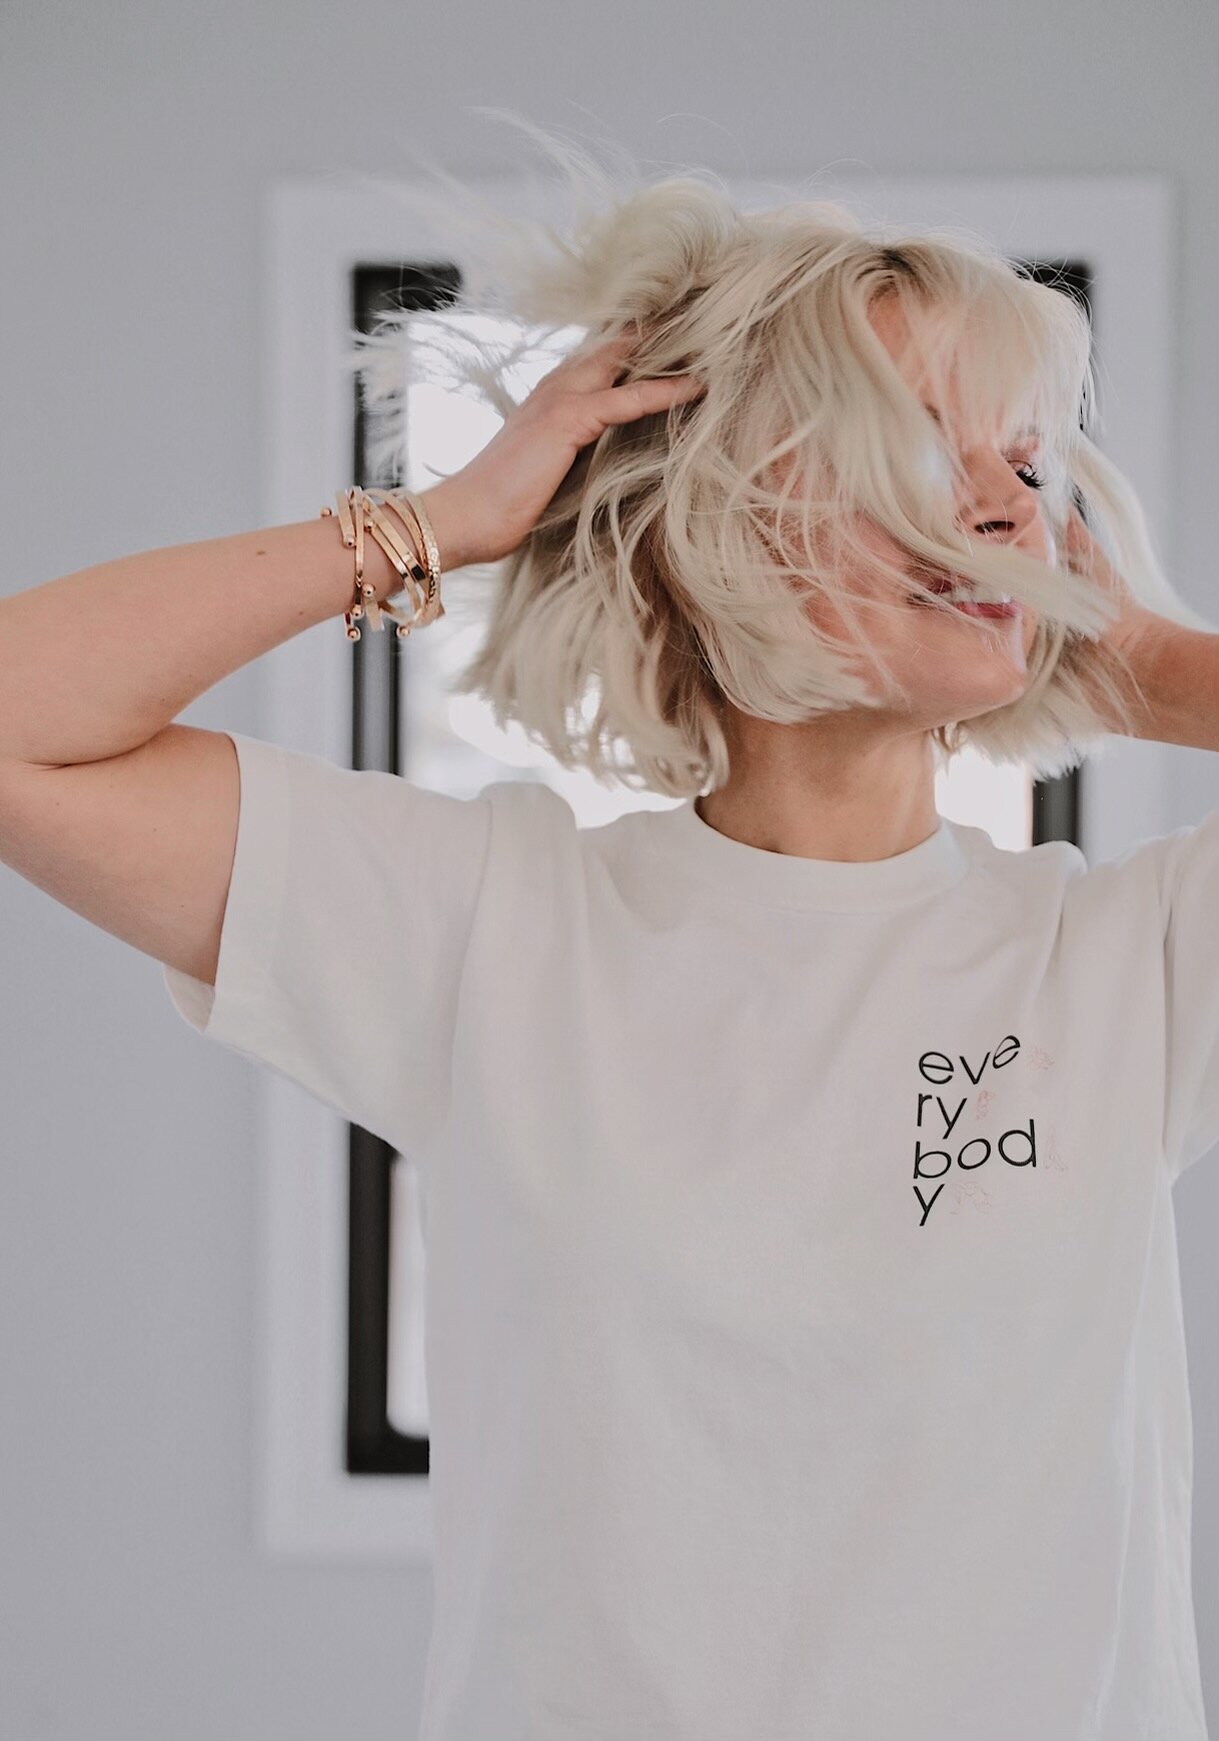 EVE*RY*BOD*Y WOMEN'S RELAXED BODY POSITIVI-TEE